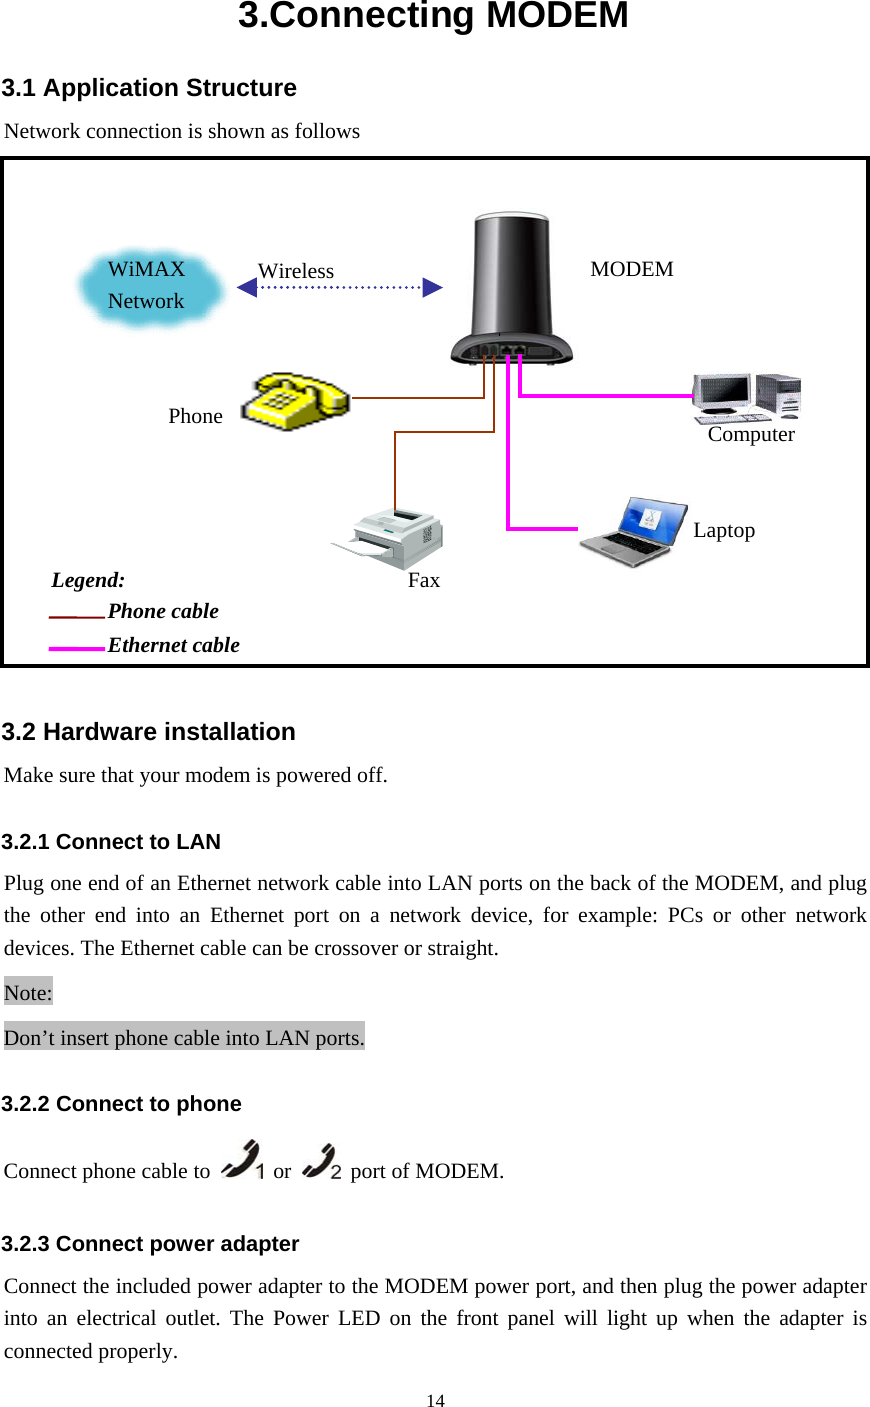 14  3.Connecting MODEM 3.1 Application Structure Network connection is shown as follows  3.2 Hardware installation Make sure that your modem is powered off. 3.2.1 Connect to LAN Plug one end of an Ethernet network cable into LAN ports on the back of the MODEM, and plug the other end into an Ethernet port on a network device, for example: PCs or other network devices. The Ethernet cable can be crossover or straight.   Note: Don’t insert phone cable into LAN ports. 3.2.2 Connect to phone Connect phone cable to   or    port of MODEM. 3.2.3 Connect power adapter Connect the included power adapter to the MODEM power port, and then plug the power adapter into an electrical outlet. The Power LED on the front panel will light up when the adapter is connected properly. WiMAX Network Phone  Computer Laptop Fax Wireless Phone cable Ethernet cable Legend: MODEM